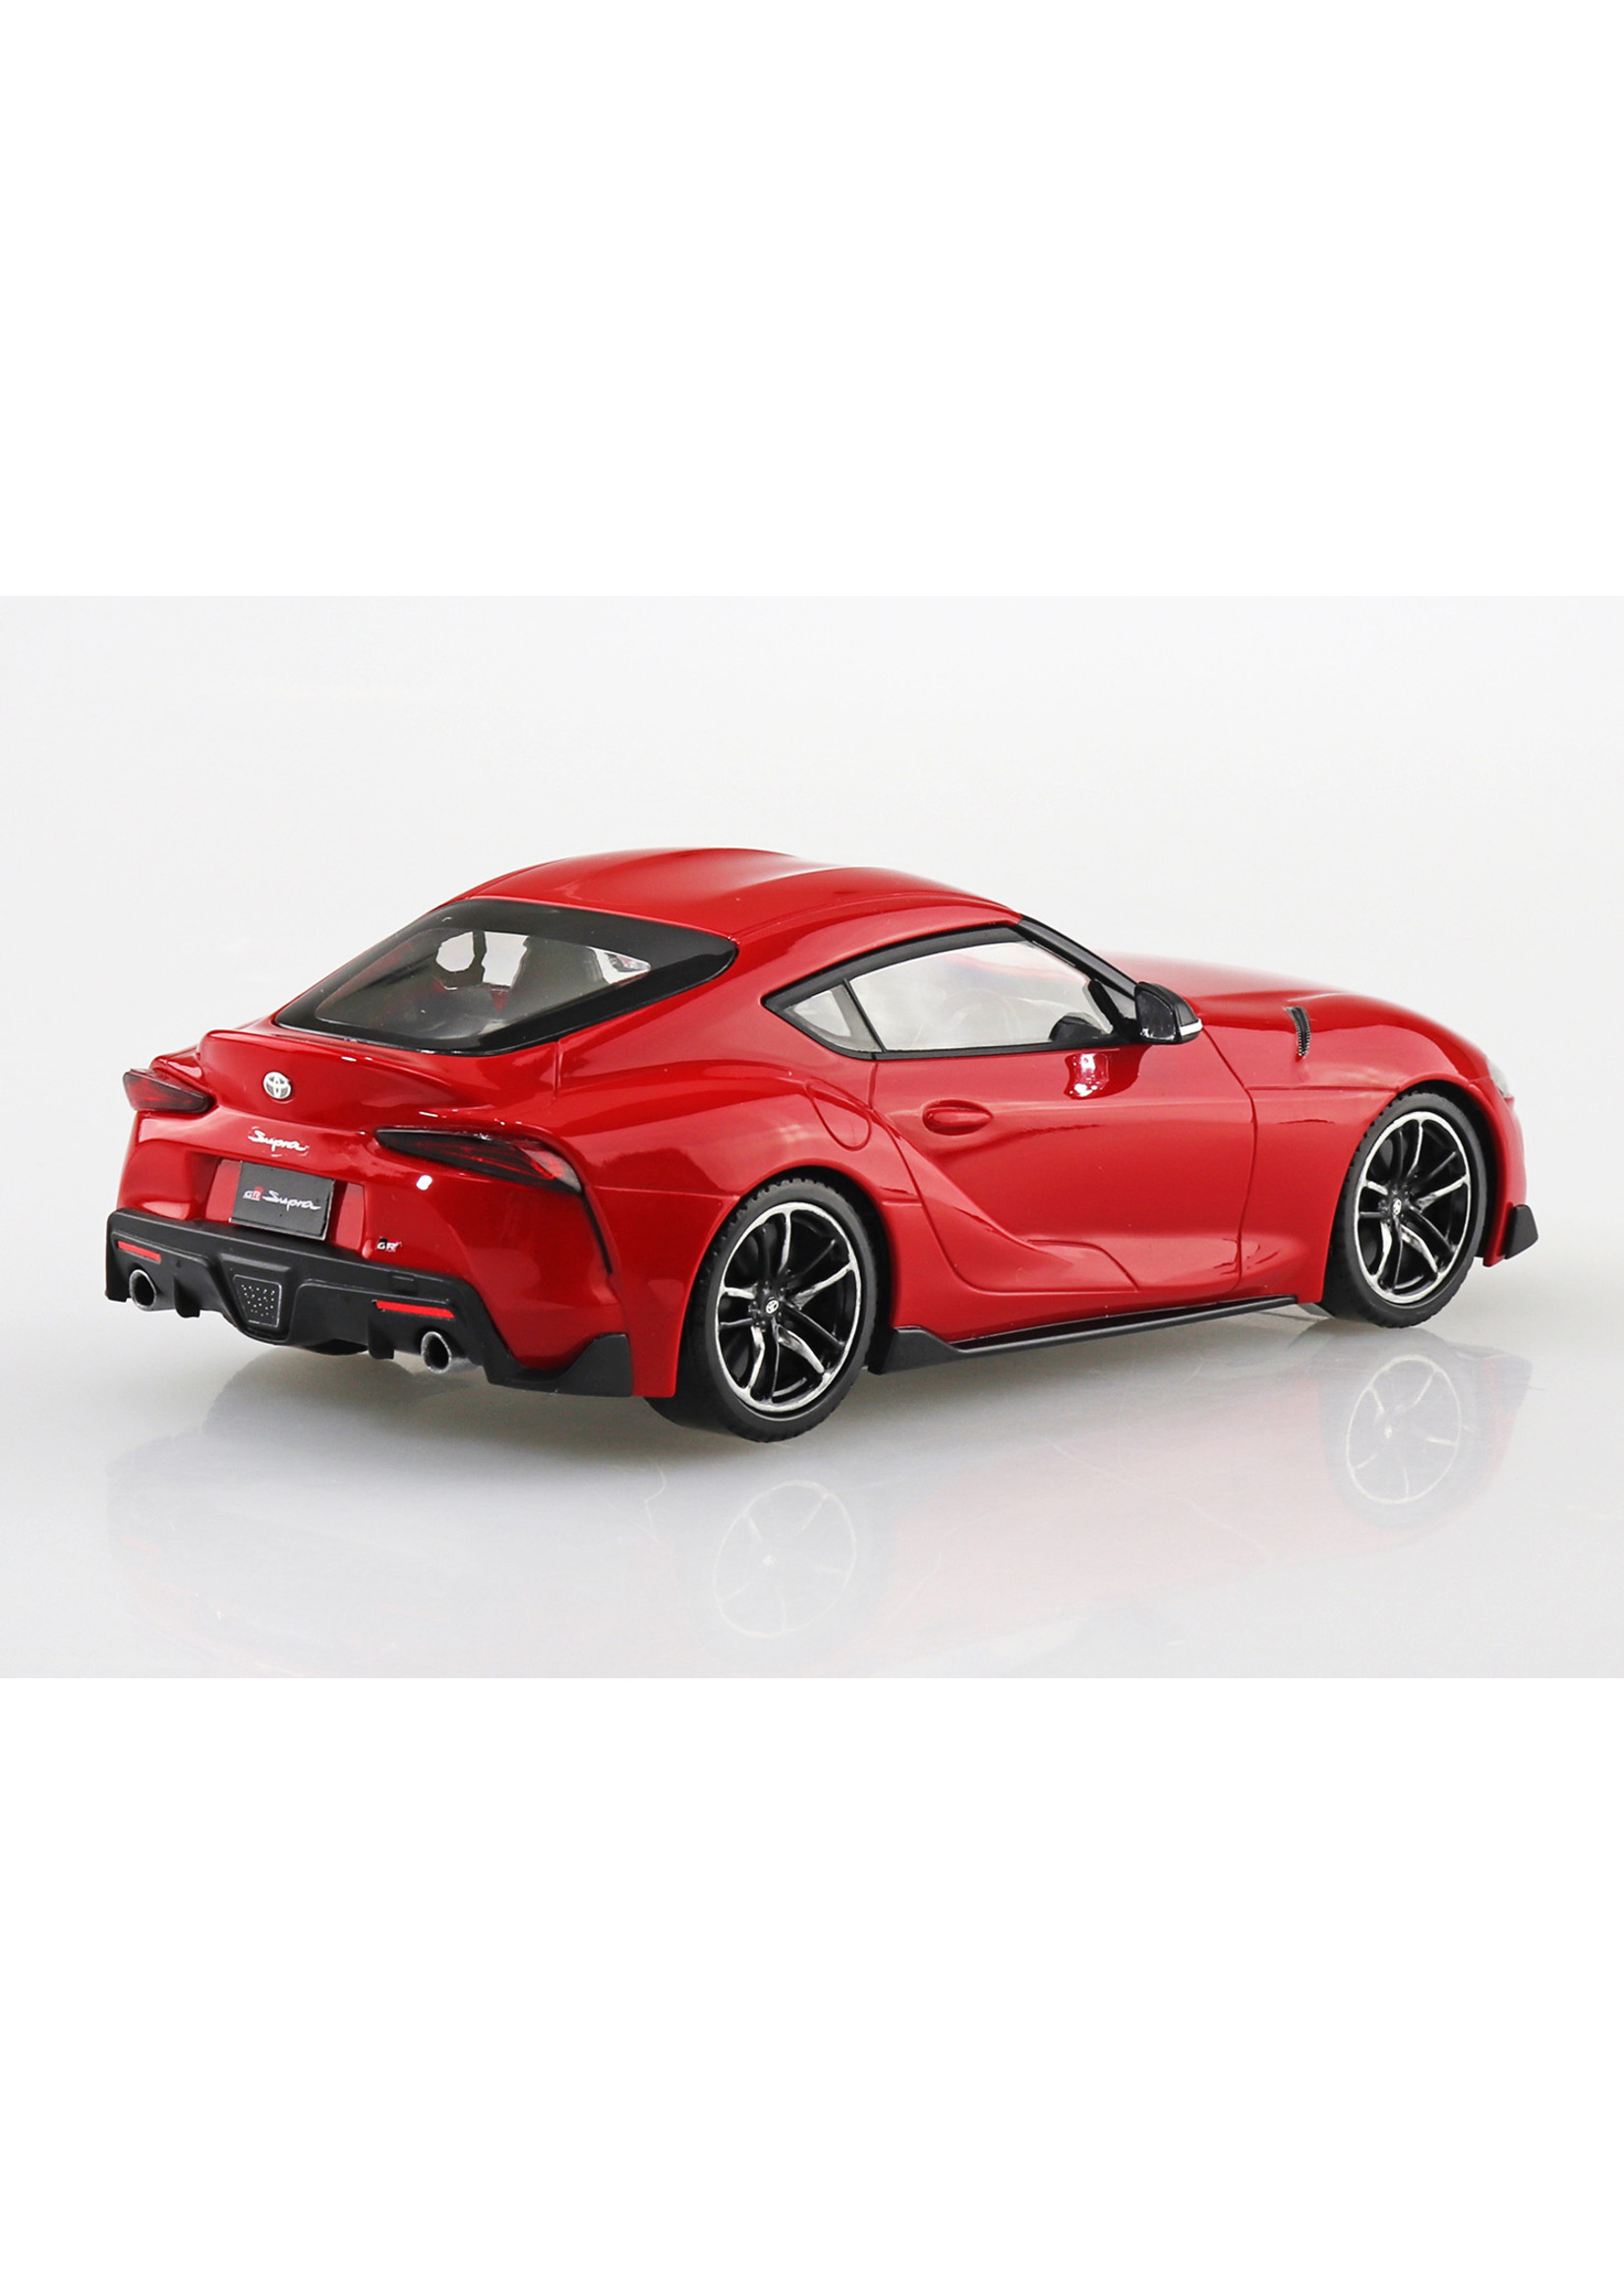 Aoshima 05885 - 1/32 Toyota GR Supra - Prominence Red